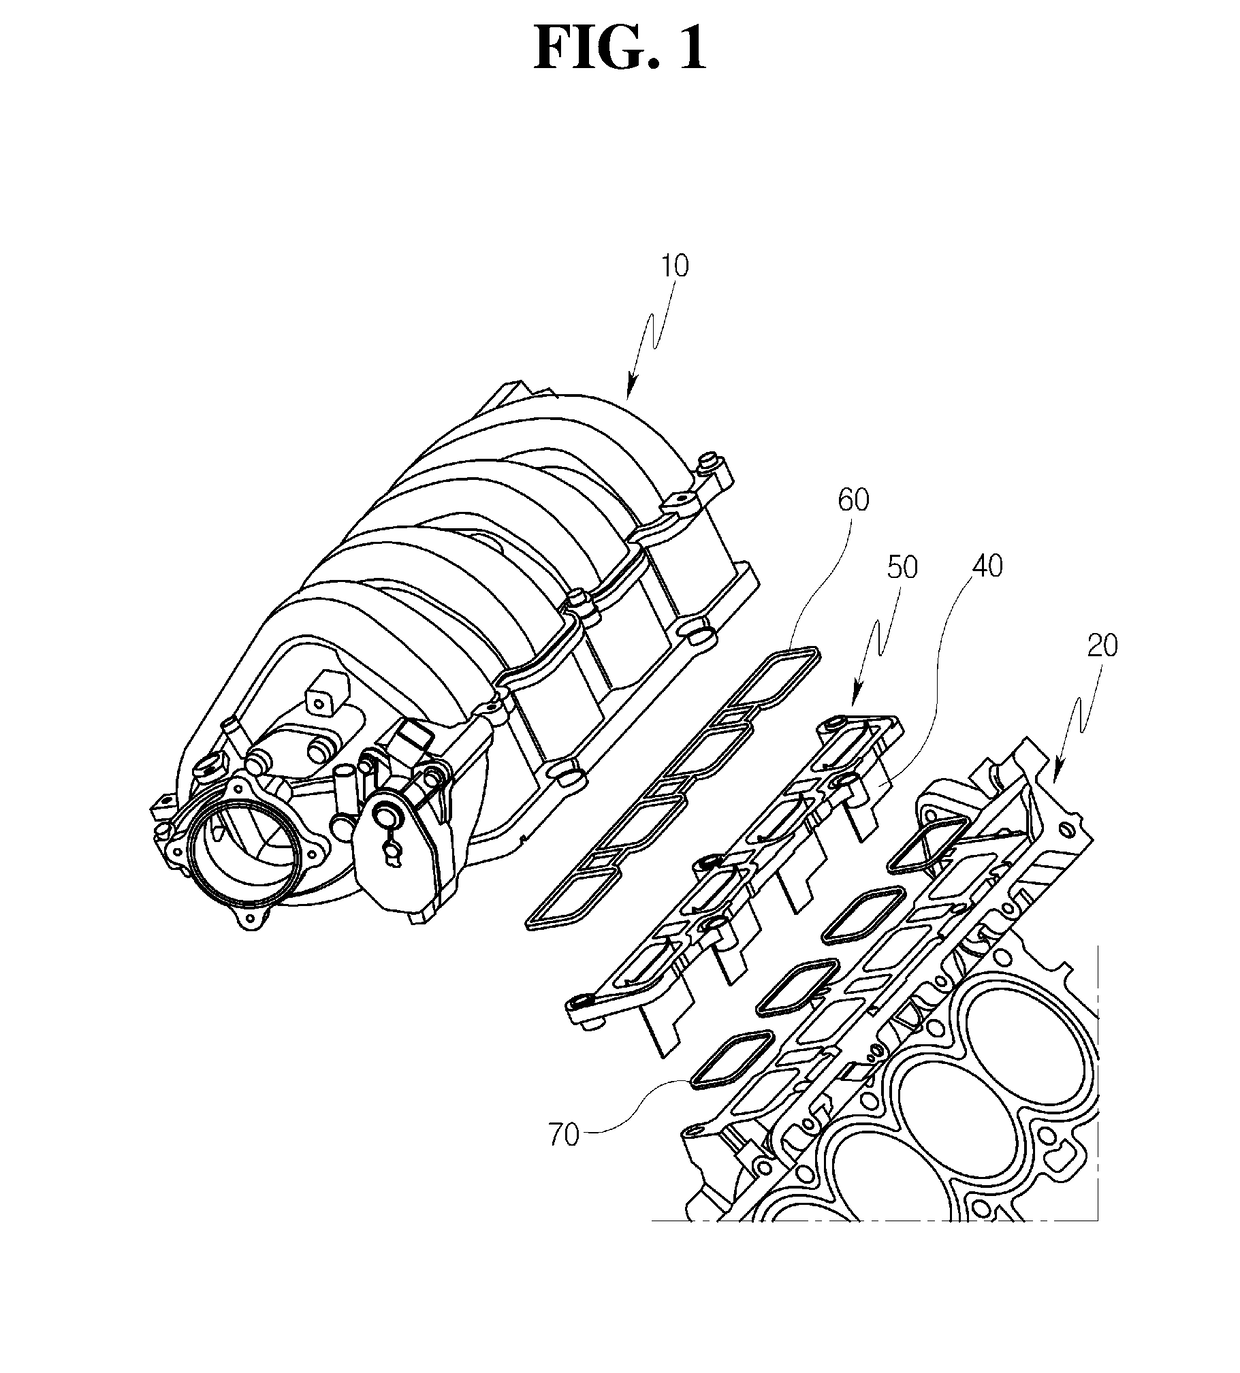 Intake apparatus for engine